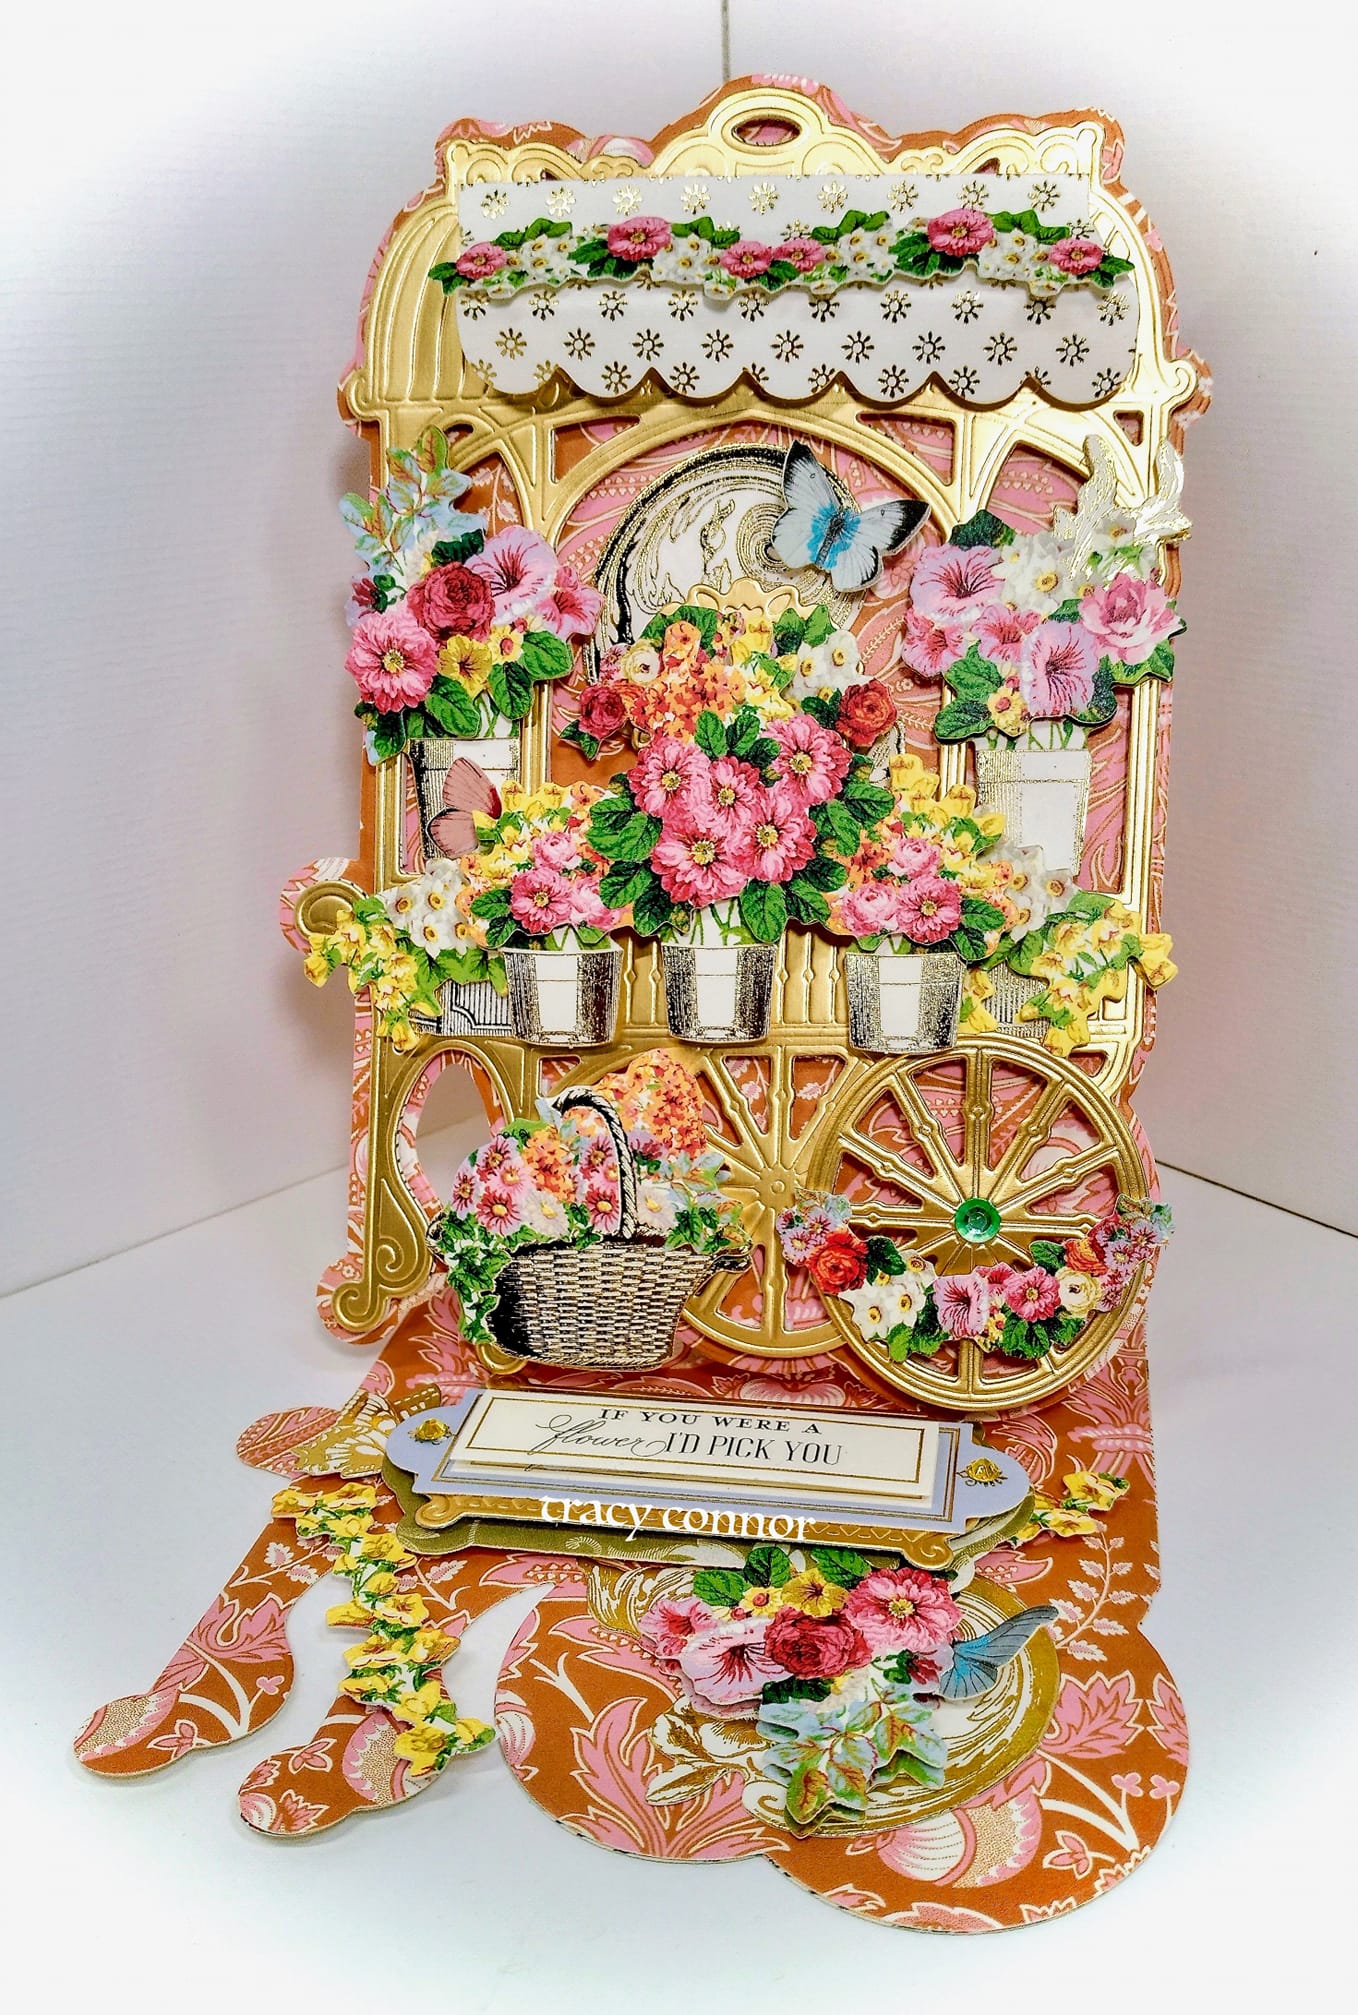 a decorative display of flowers and a clock.